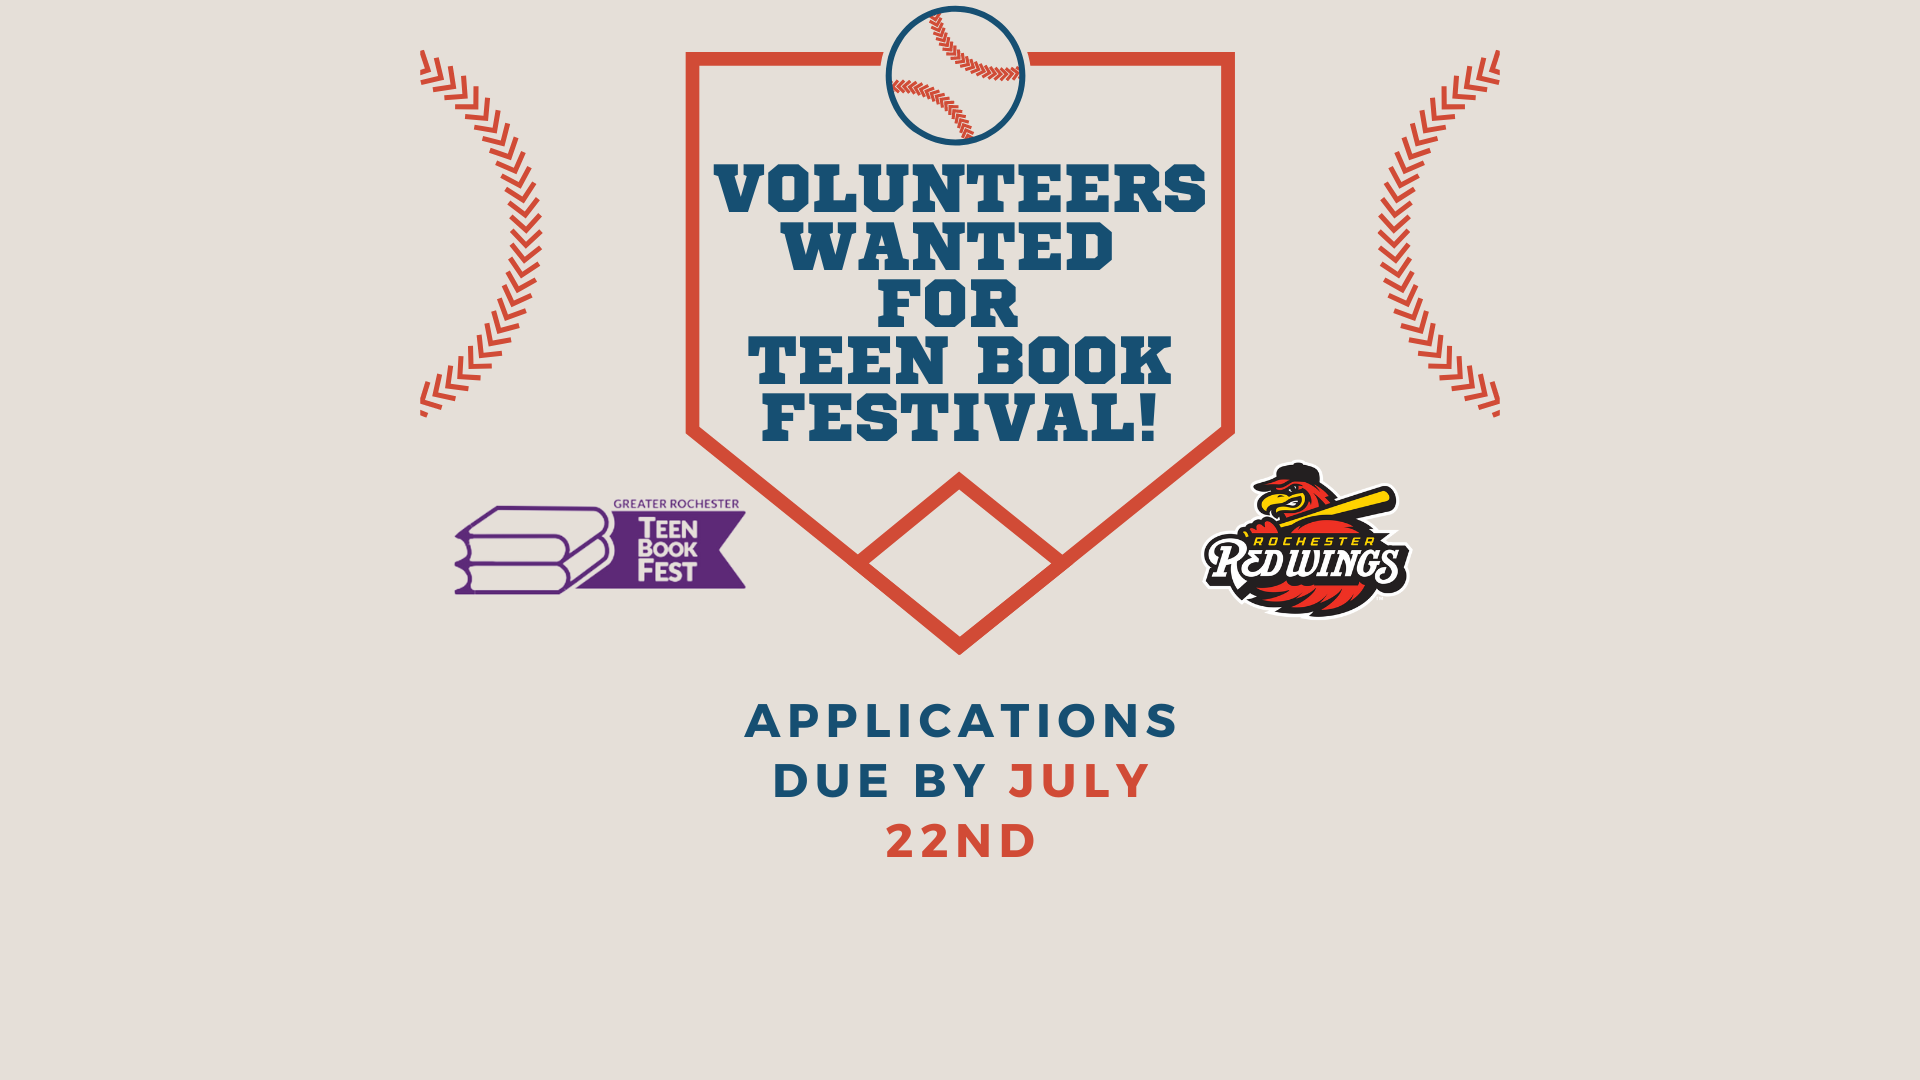 Applications are now open to volunteer at TBF until July 22nd!